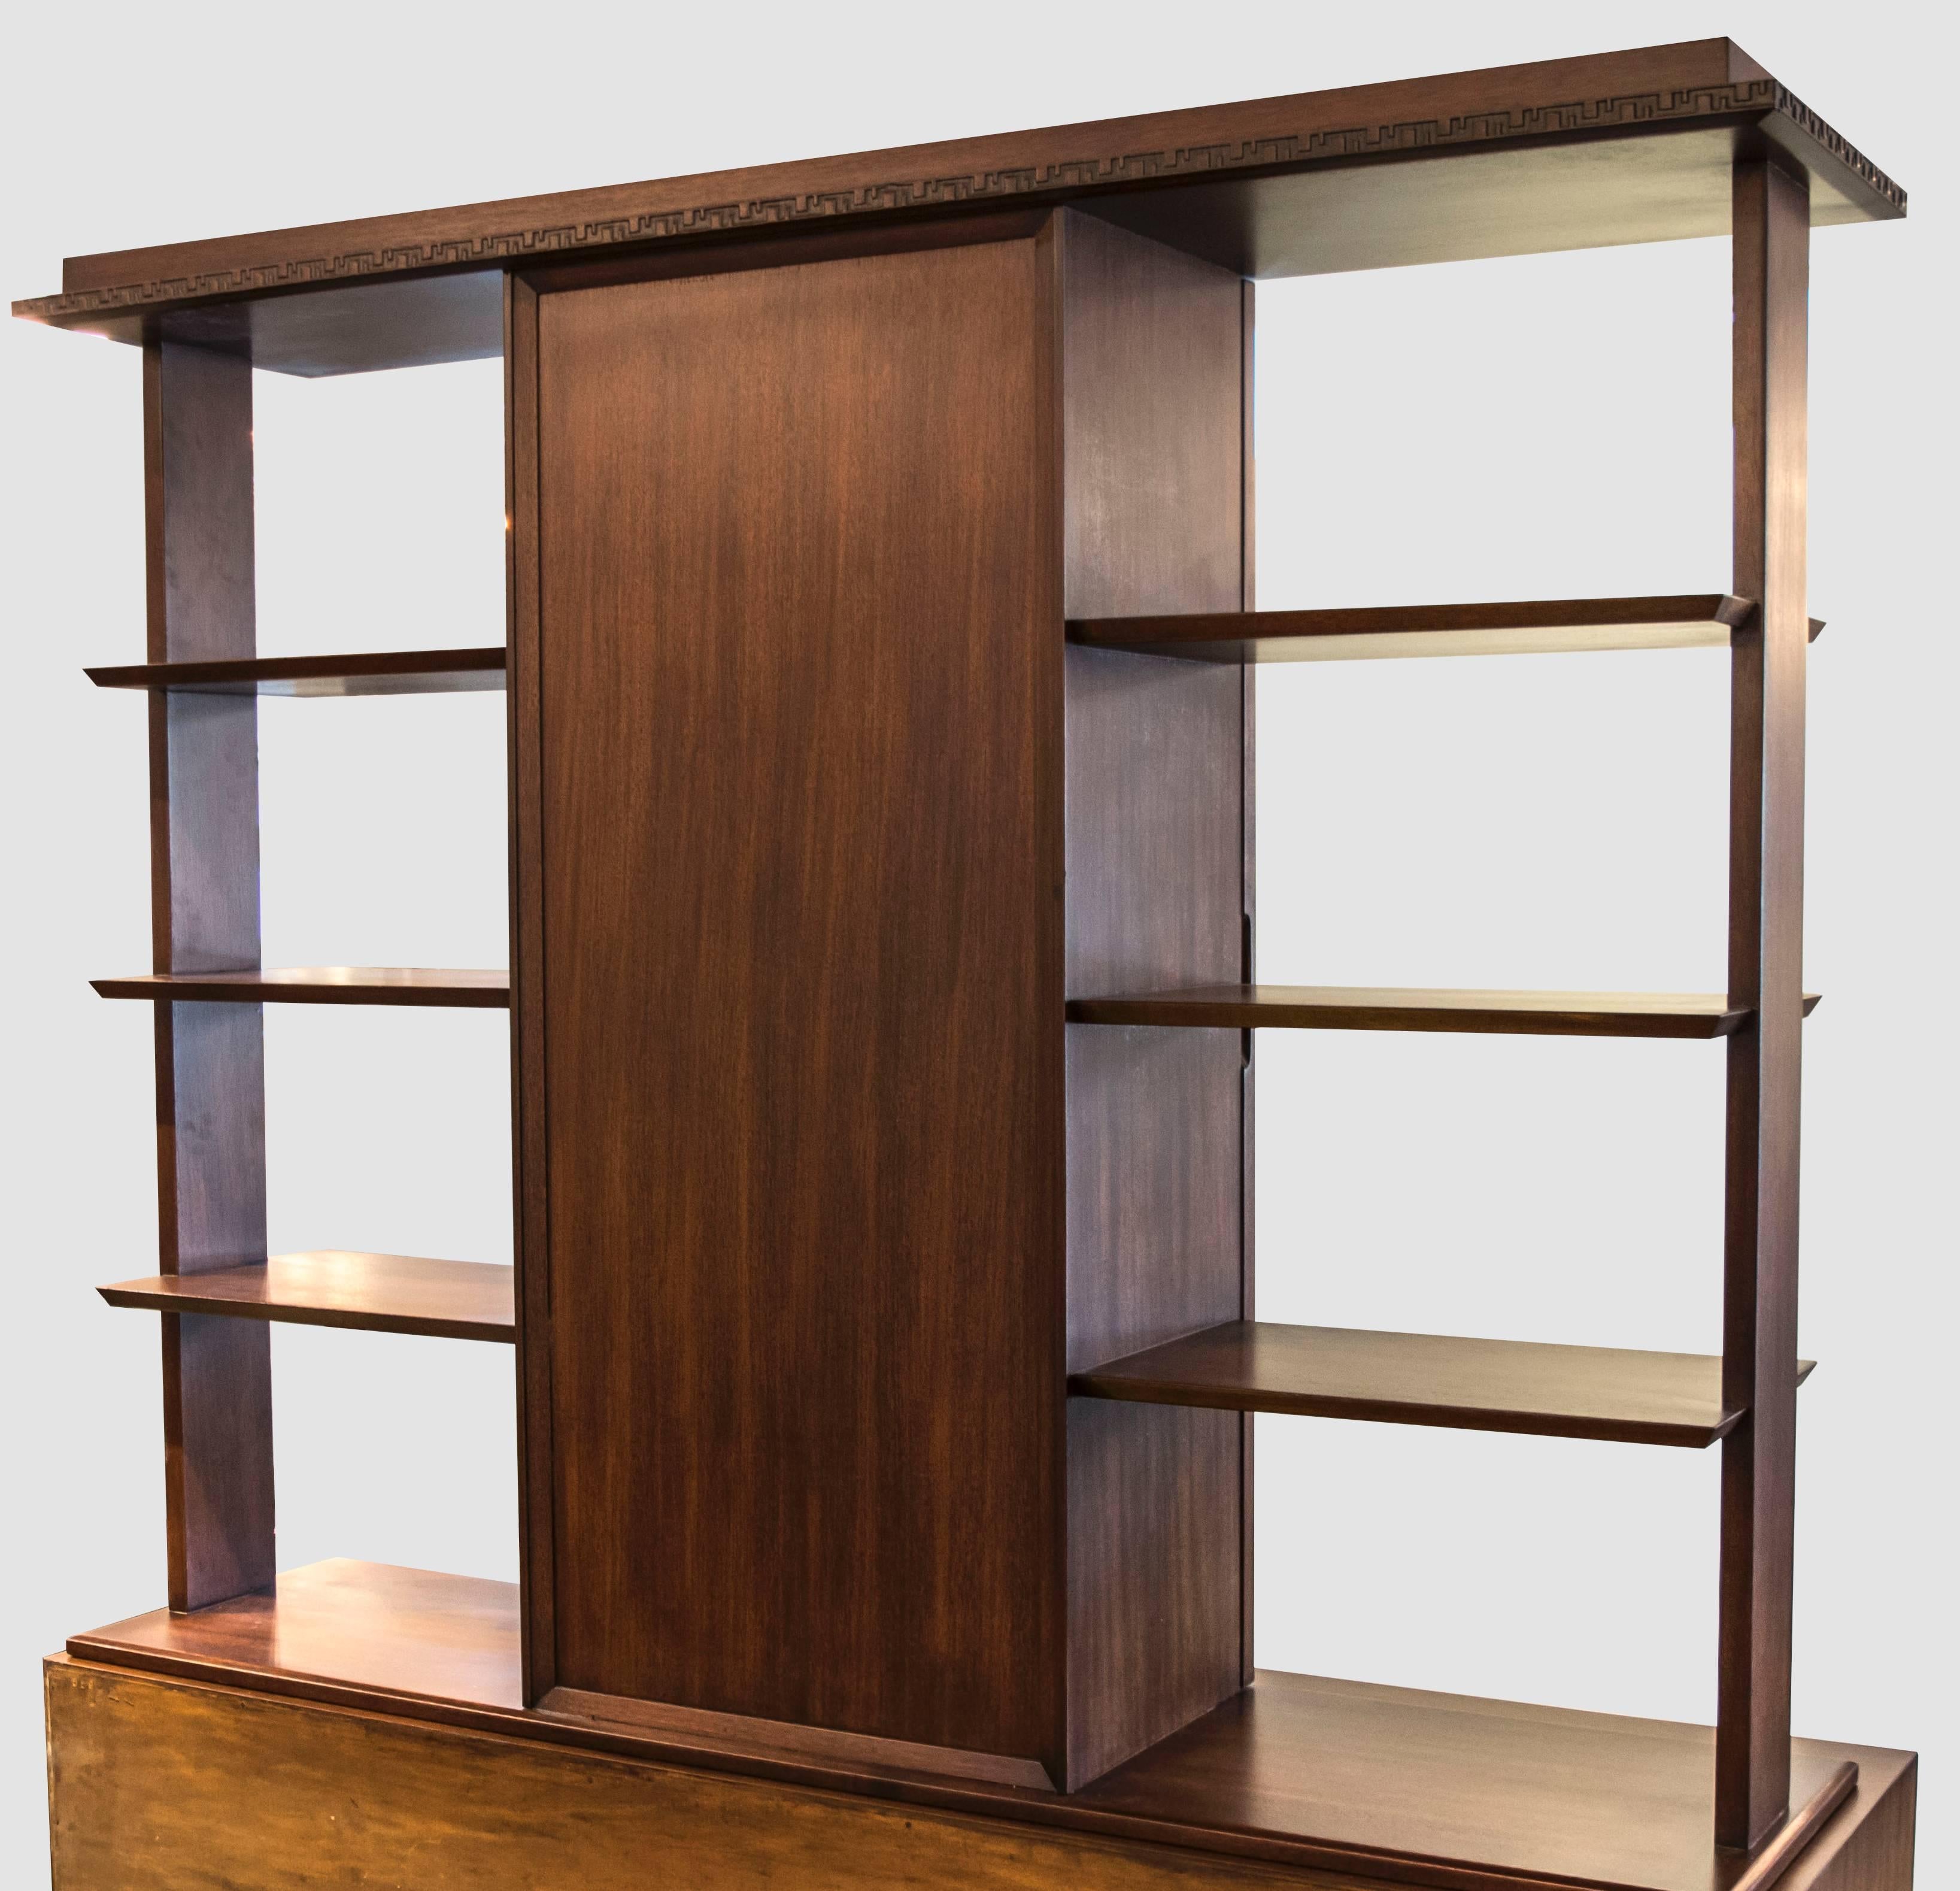 In 1955 Frank Lloyd Wright teamed with the Heritage-Henredon furniture partnership to create a furniture collection originally intended for the American mass market post World War II. This group was the 